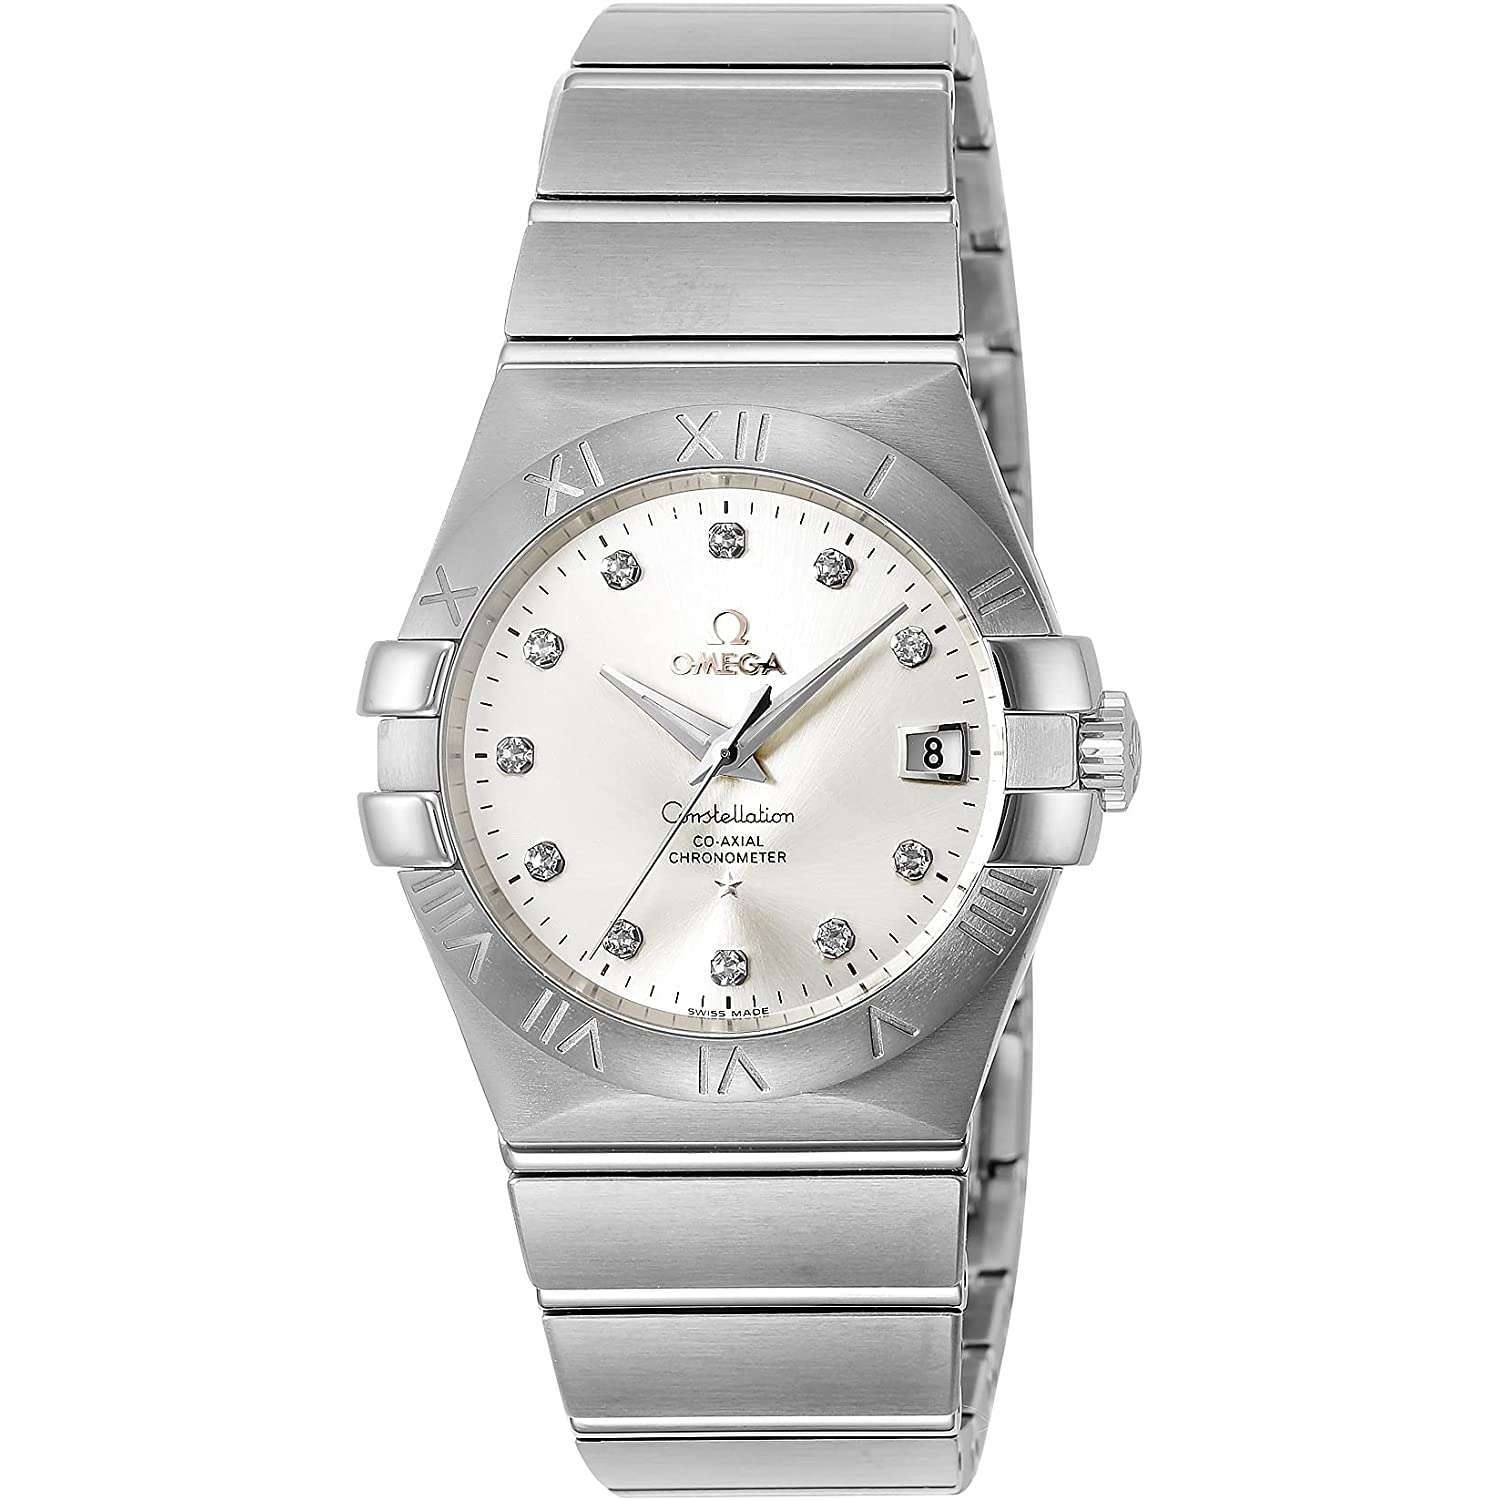 OMEGA CONSTELLATION CO-AXIAL CHONOMETER 34 MM MEN WATCH 123.10.35.20.52.001 - ROOK JAPAN